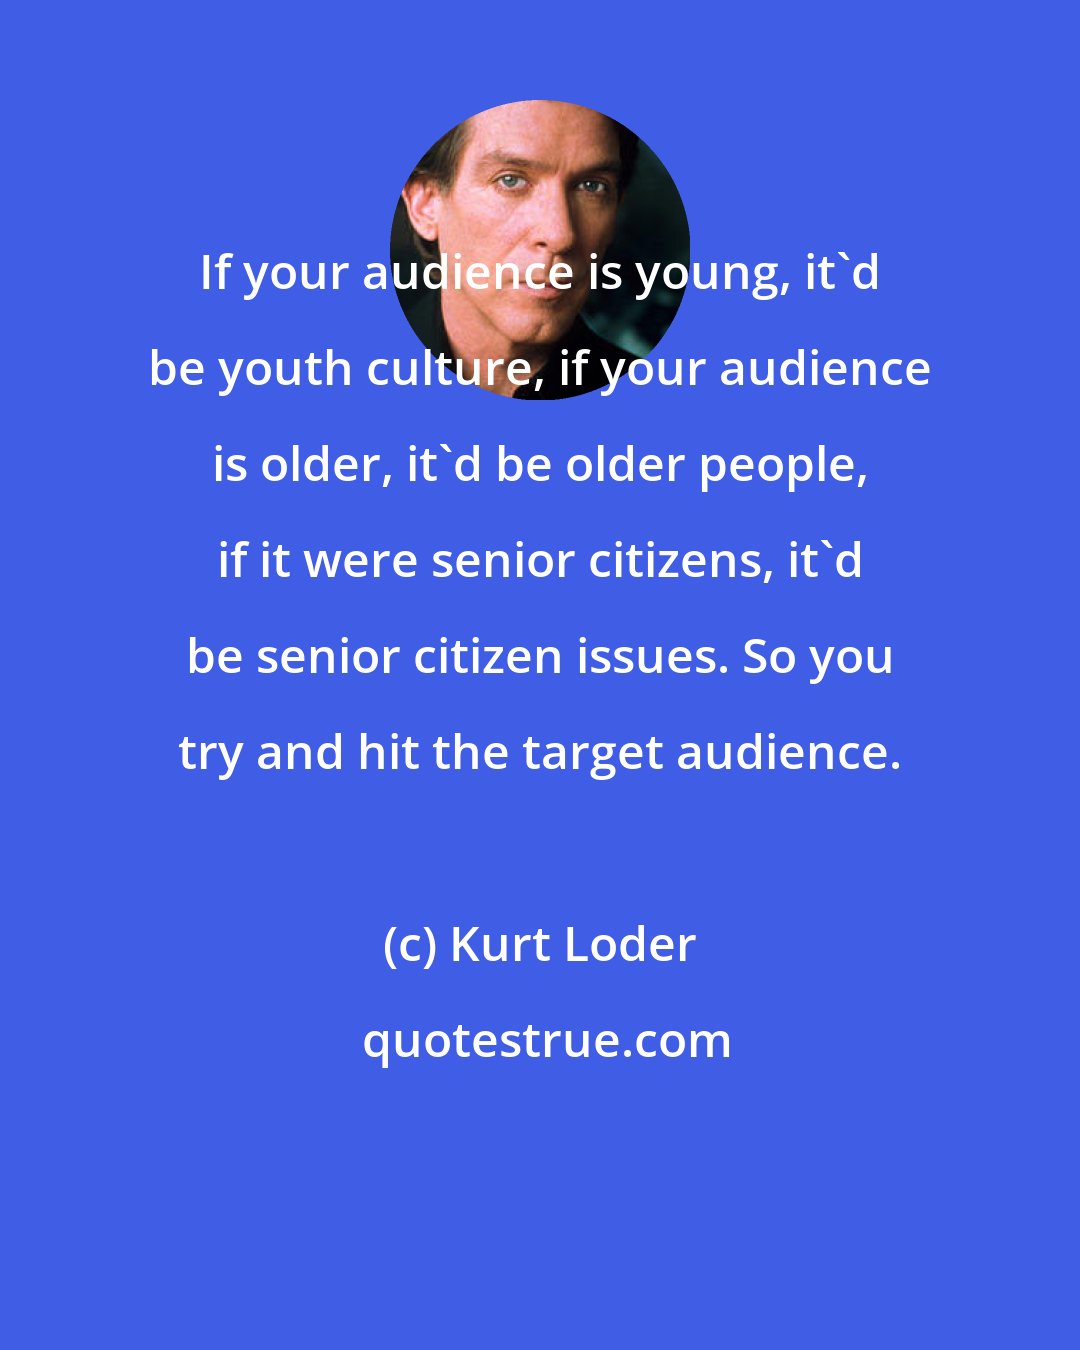 Kurt Loder: If your audience is young, it'd be youth culture, if your audience is older, it'd be older people, if it were senior citizens, it'd be senior citizen issues. So you try and hit the target audience.